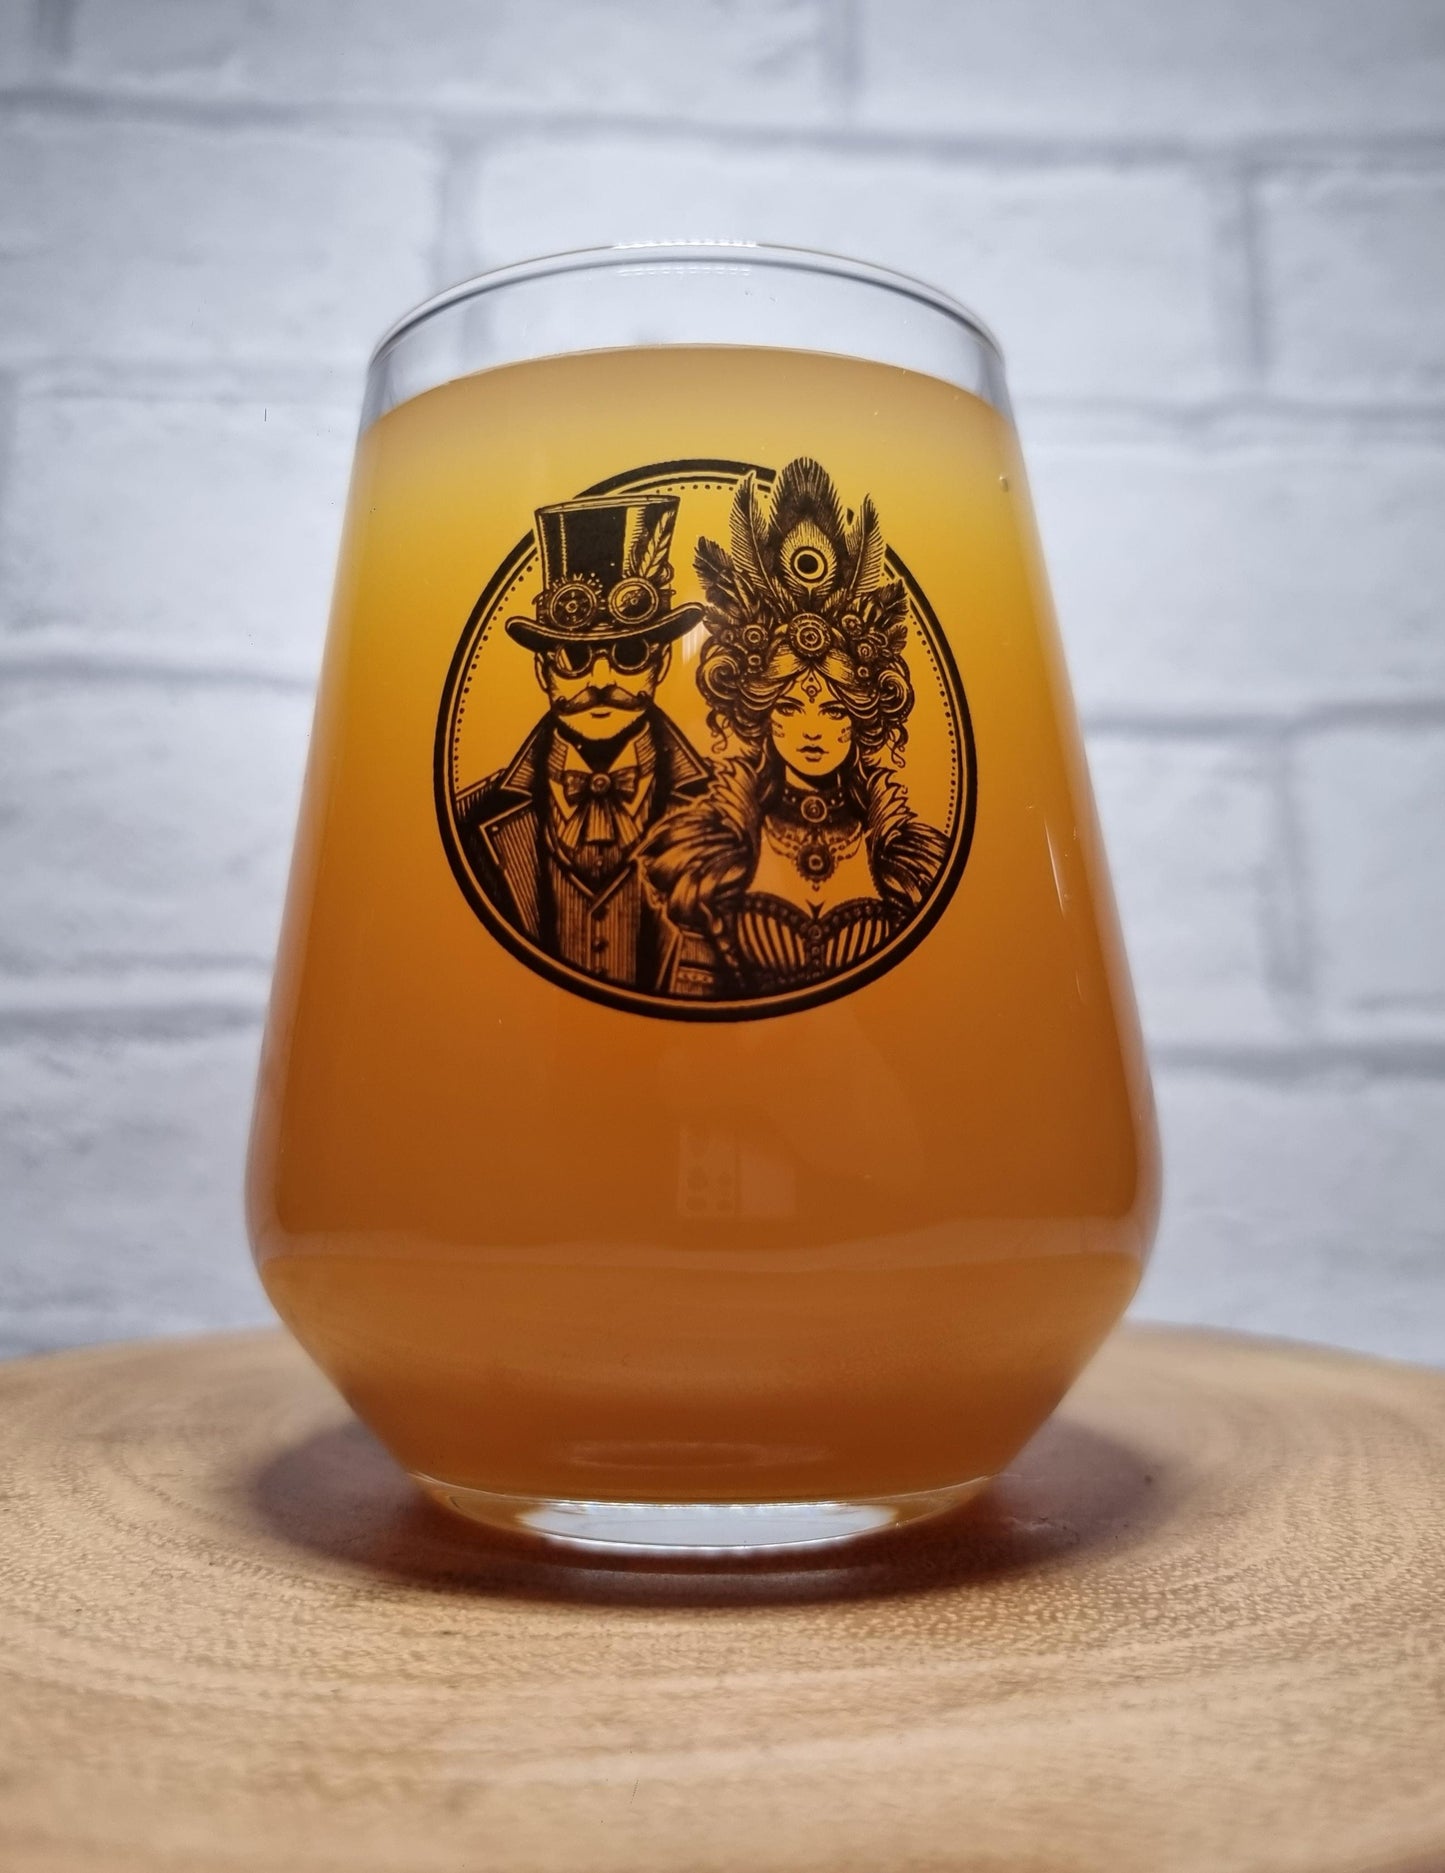 SteamPunk Couple Goals - Perfect Gift Idea for a SteamPunk Beer Glassware